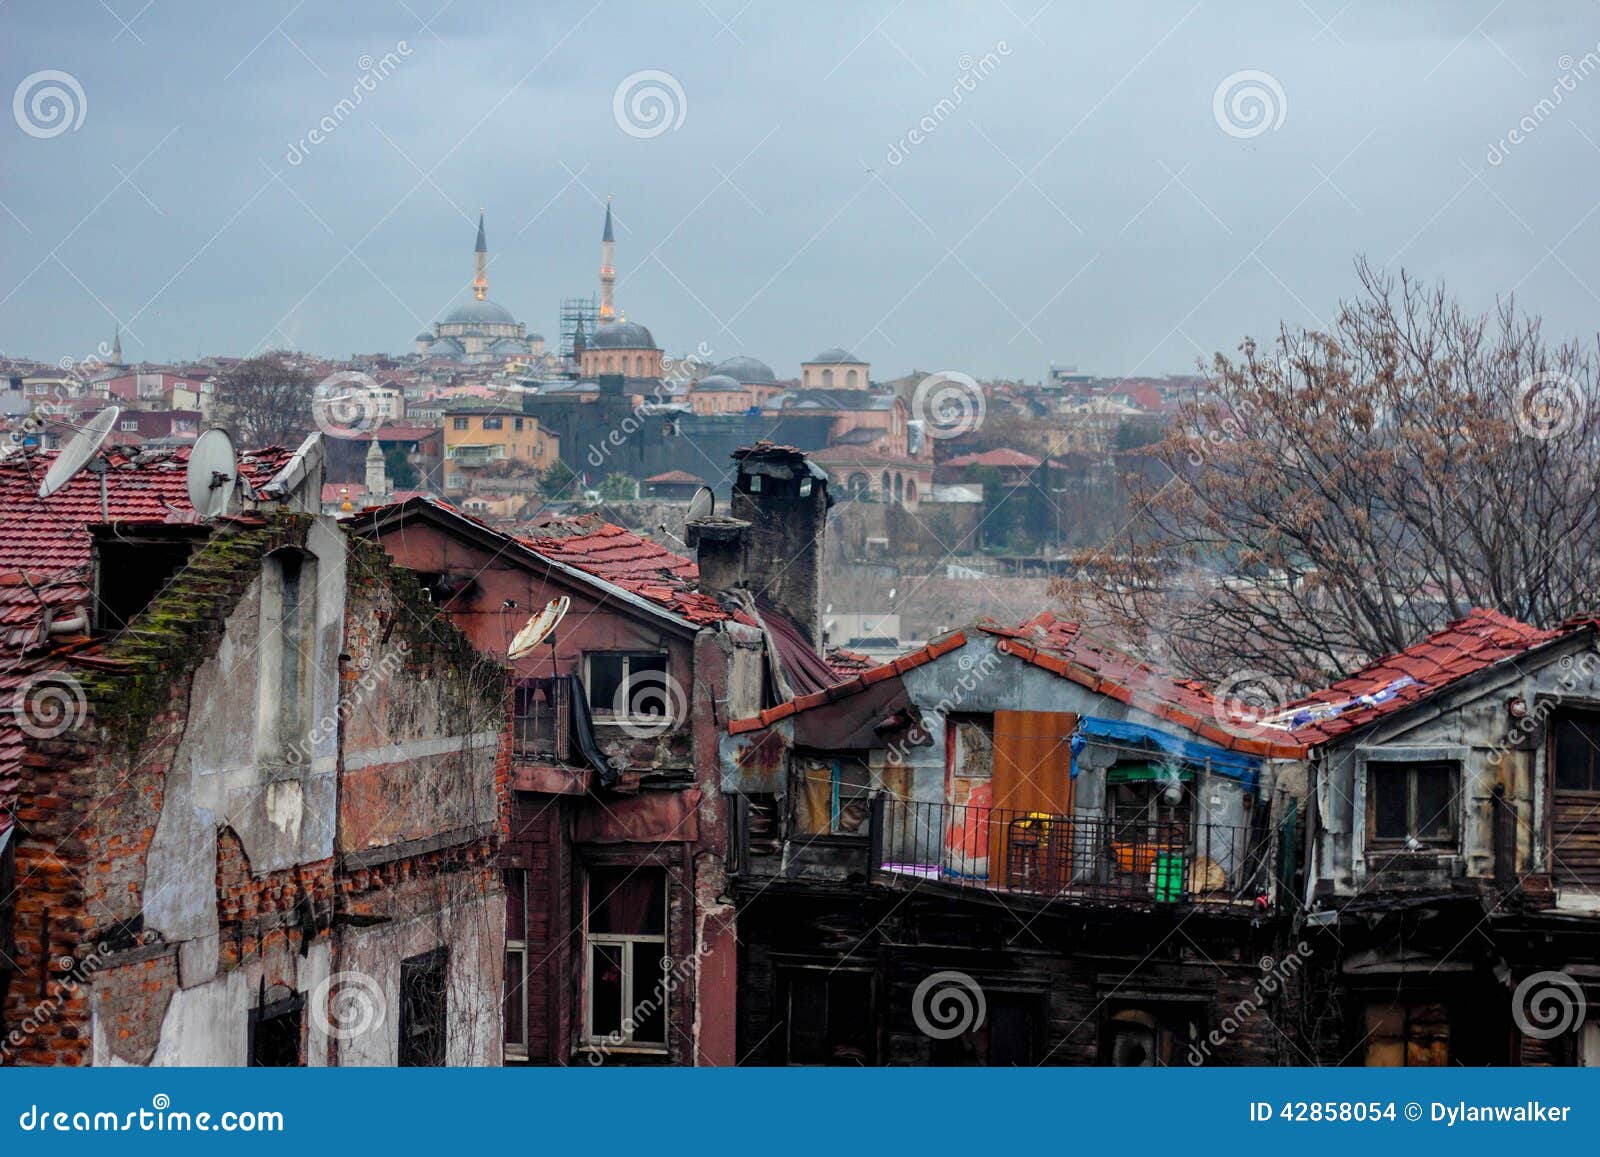 mosque and slums of istanbul, turkey